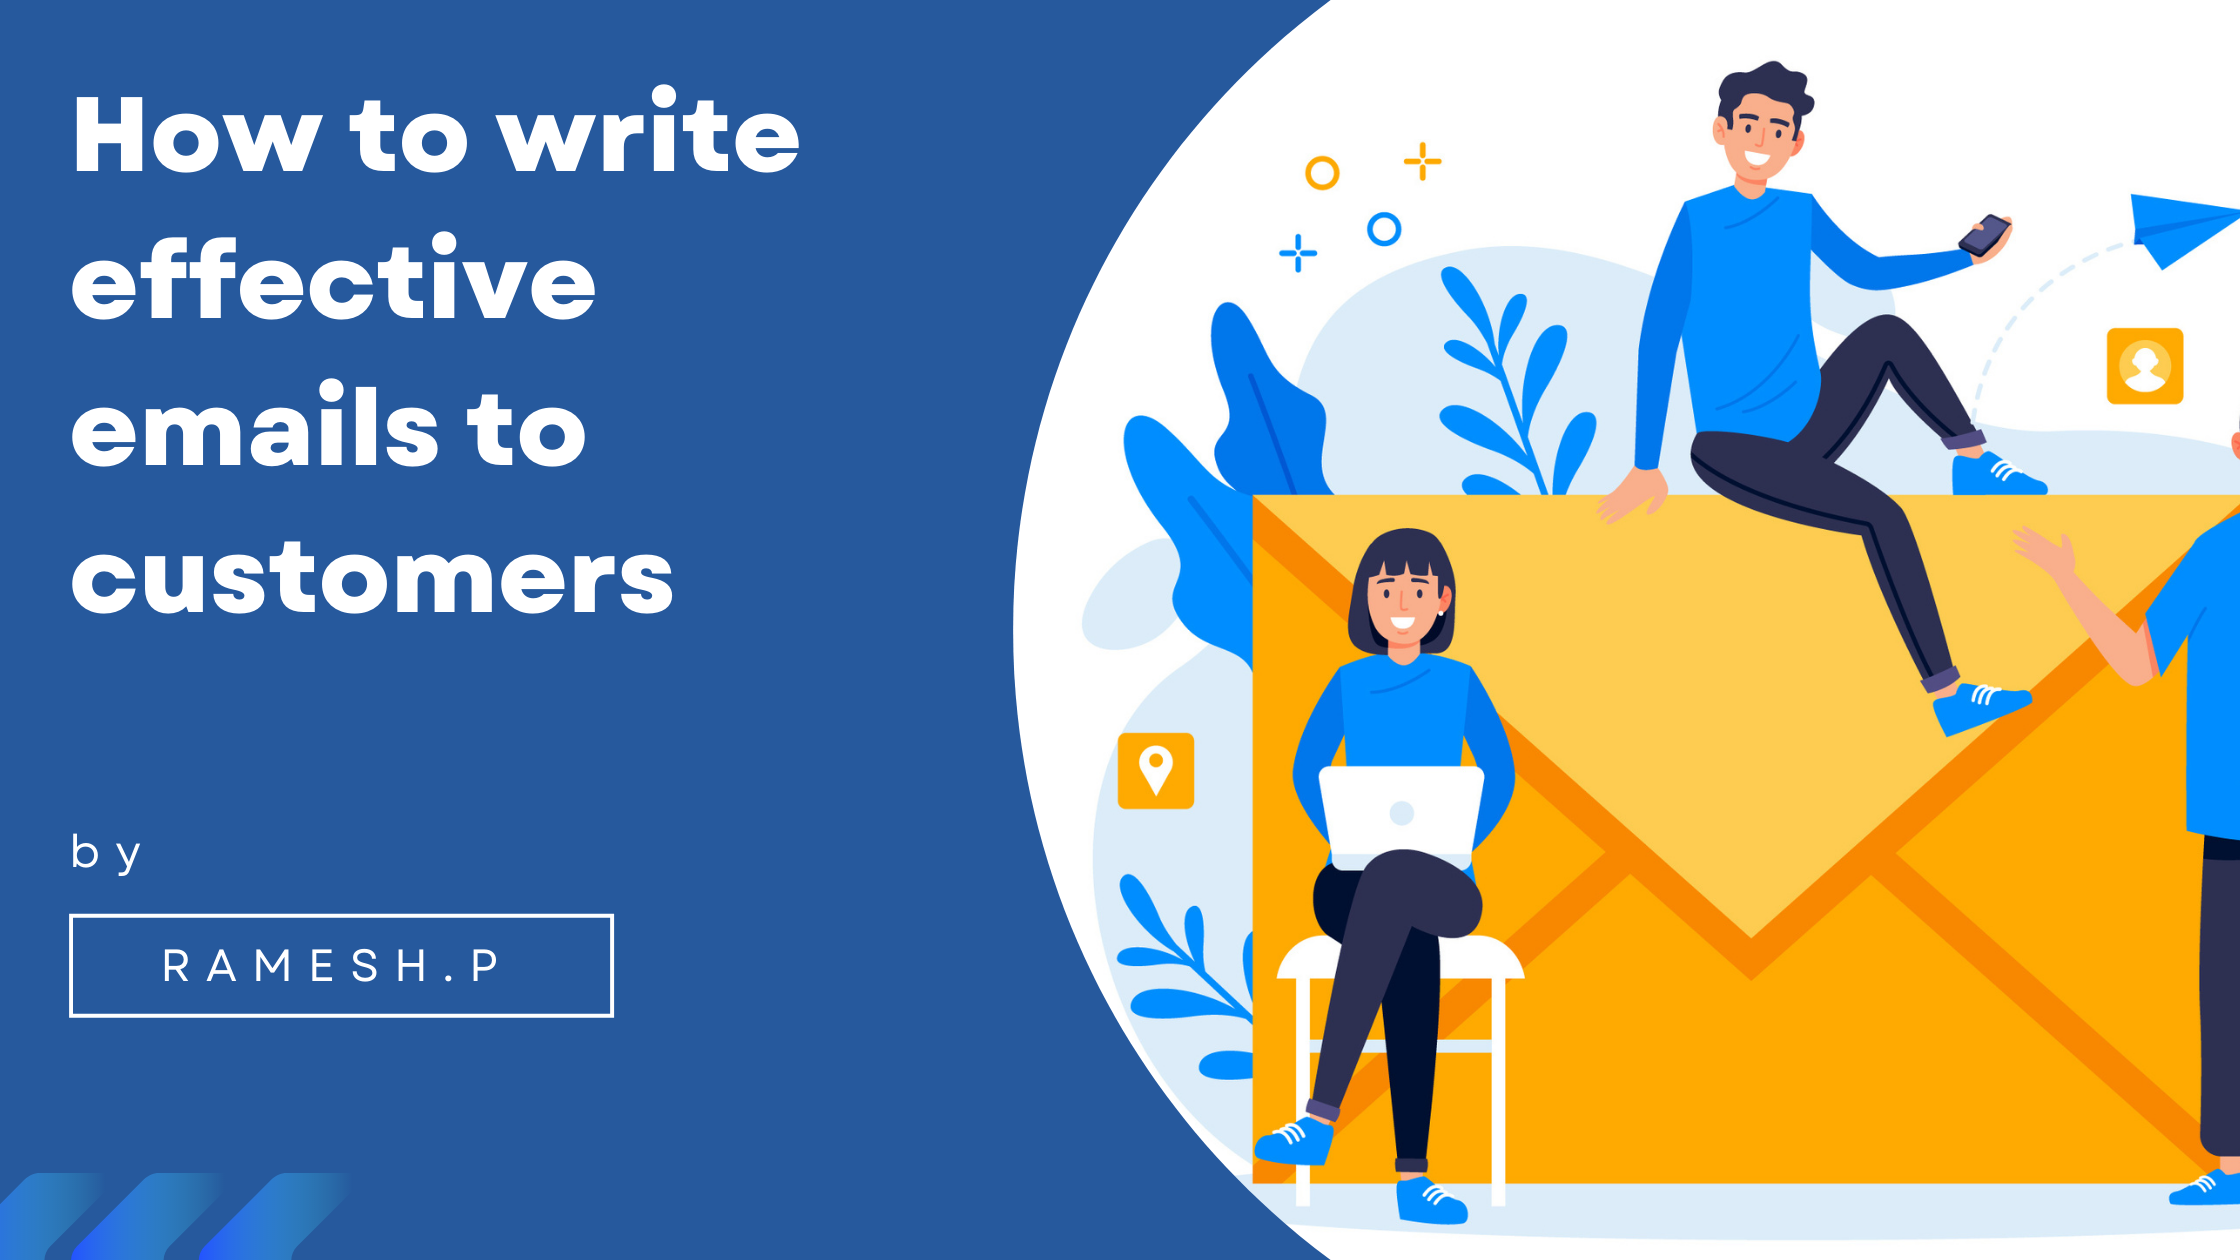 How to write effective emails to customers